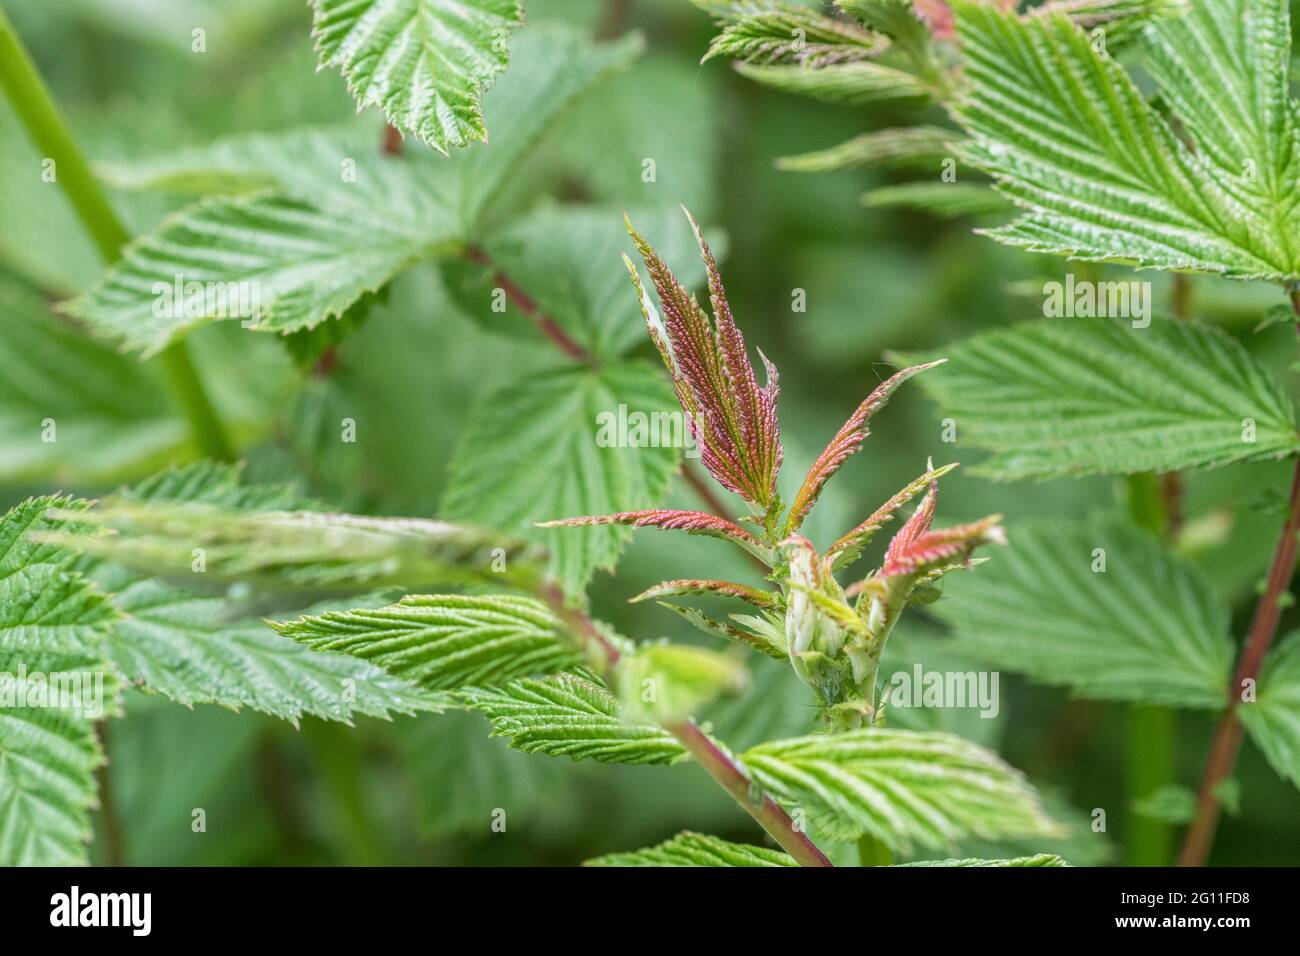 Very young, red-purple tinged, leaves of Meadowsweet / Filipendula ulmaria in roadside ditch. Once used as medicinal plant for aspirin-like content. Stock Photo